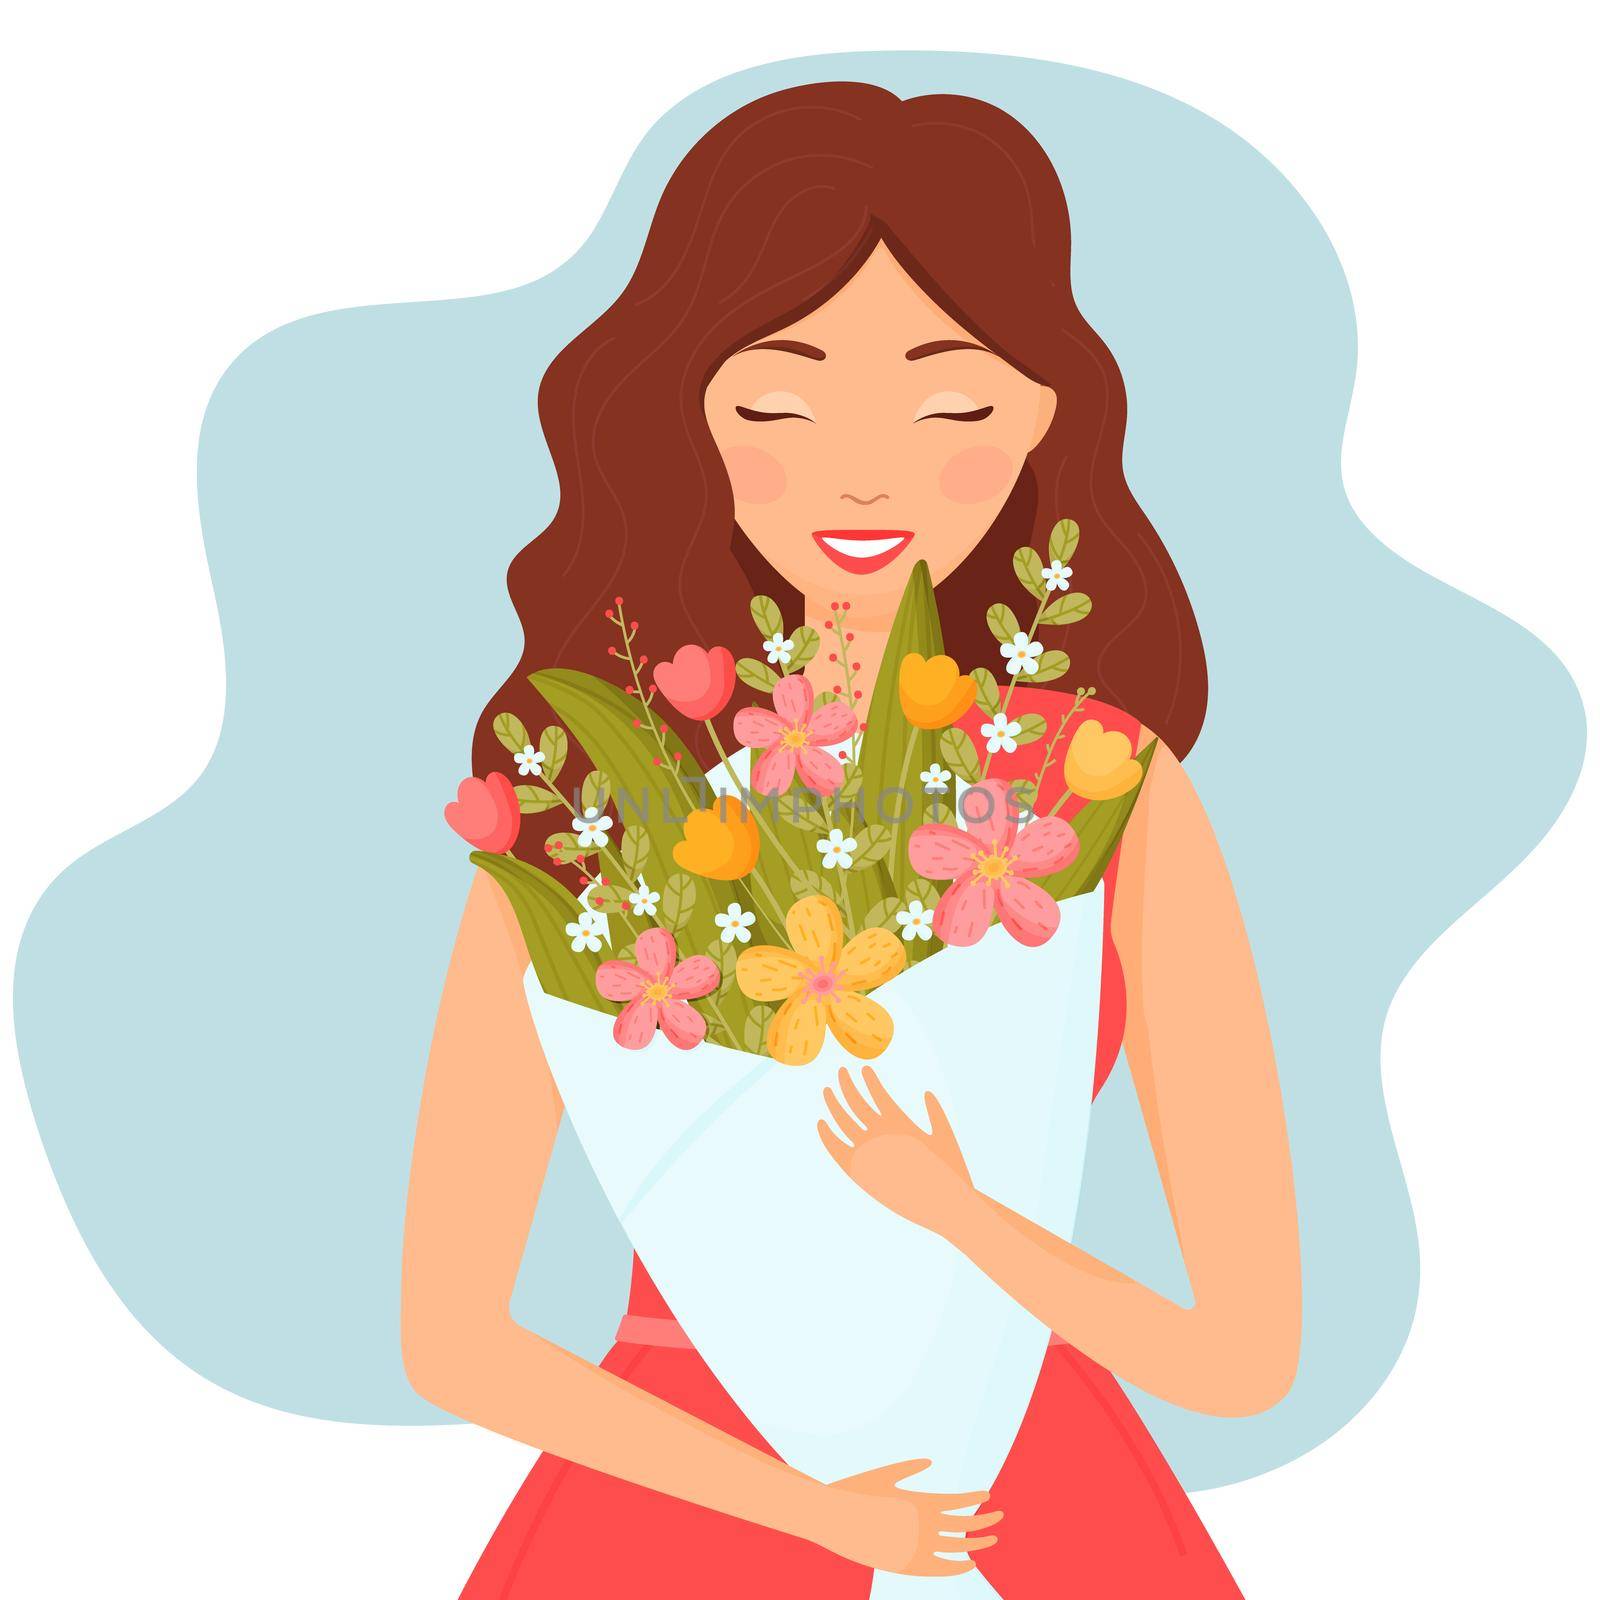 happy girl with a bouquet of flowers vector flat illustration on a white background by Lena_Khmelniuk